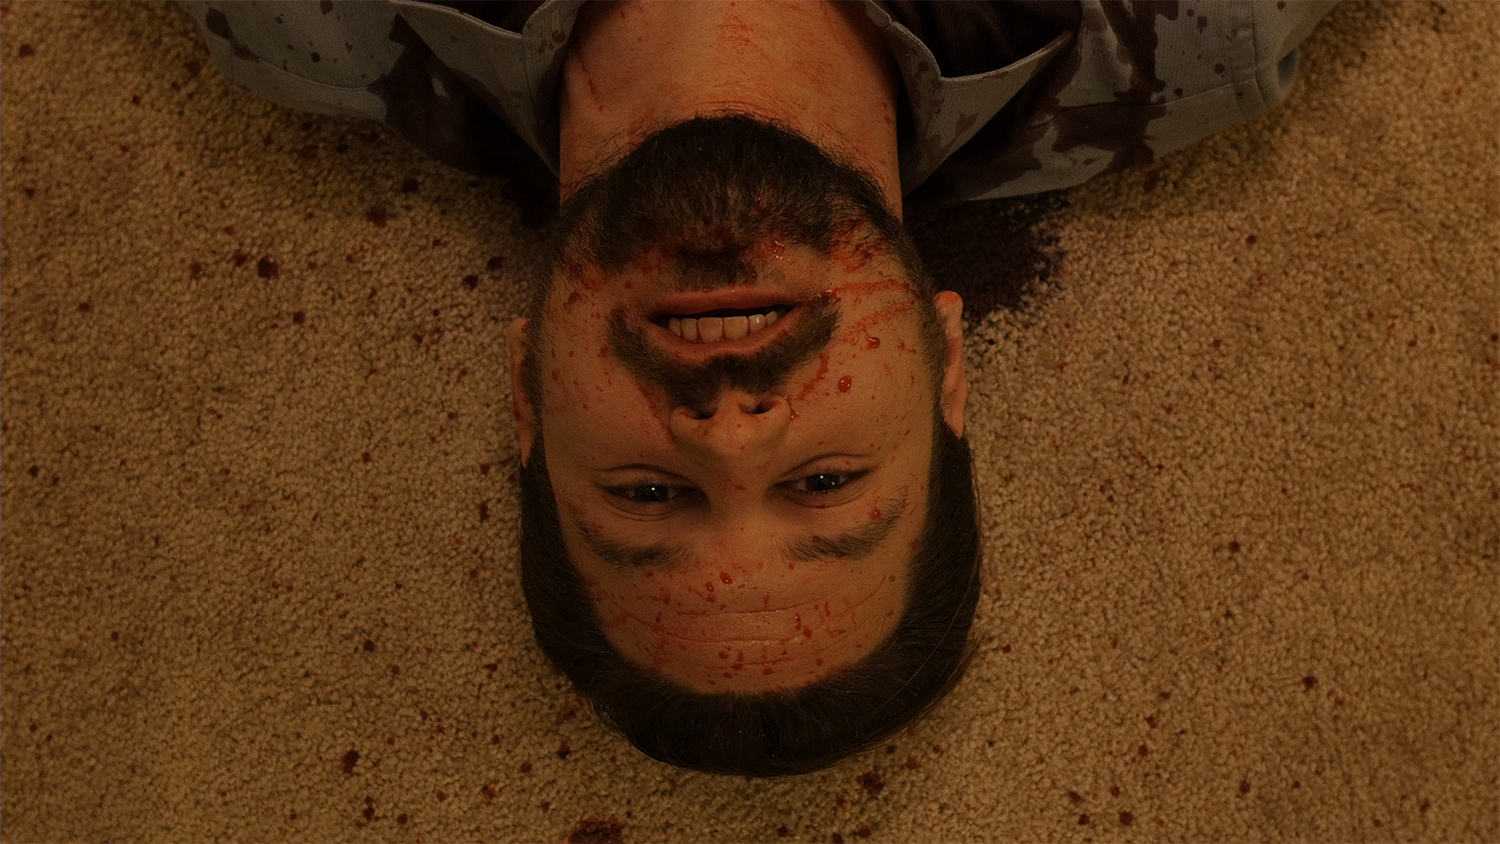 A bloodied actor lies on a carpeted floor in the movie Cruel Hearts